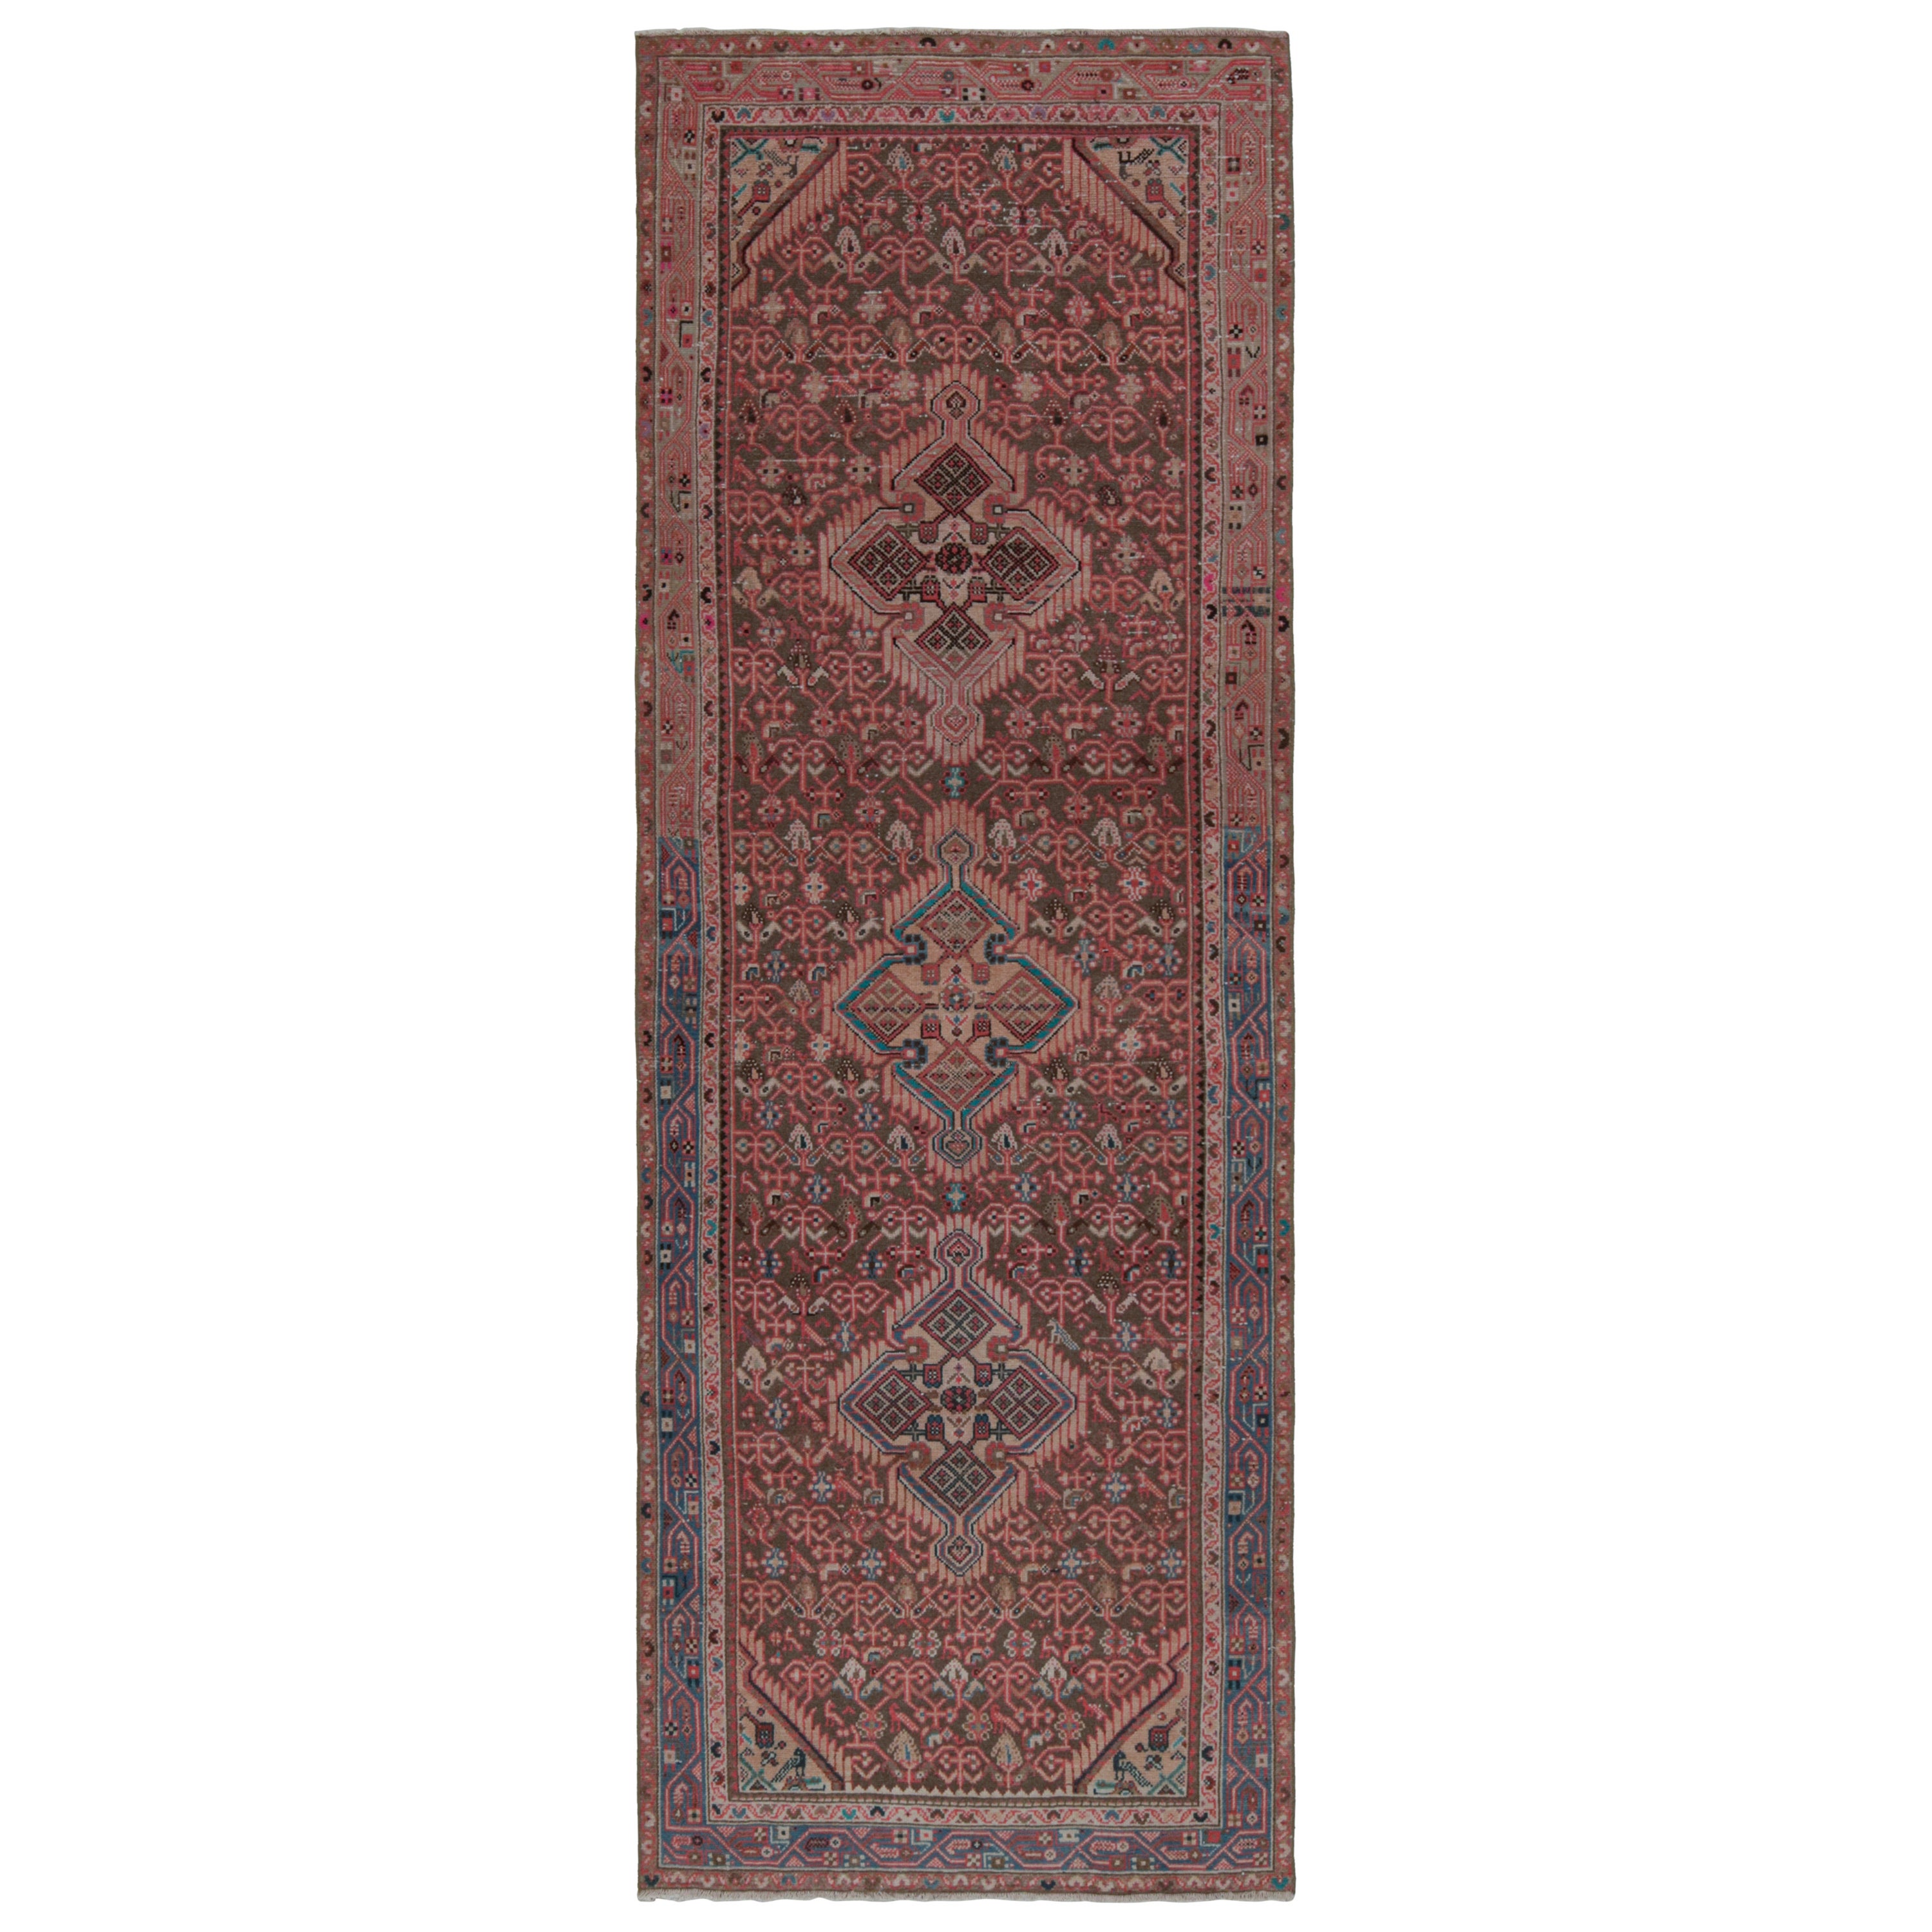 Vintage Persian runner with Red, Beige-Brown Patterns by Rug & Kilim For Sale